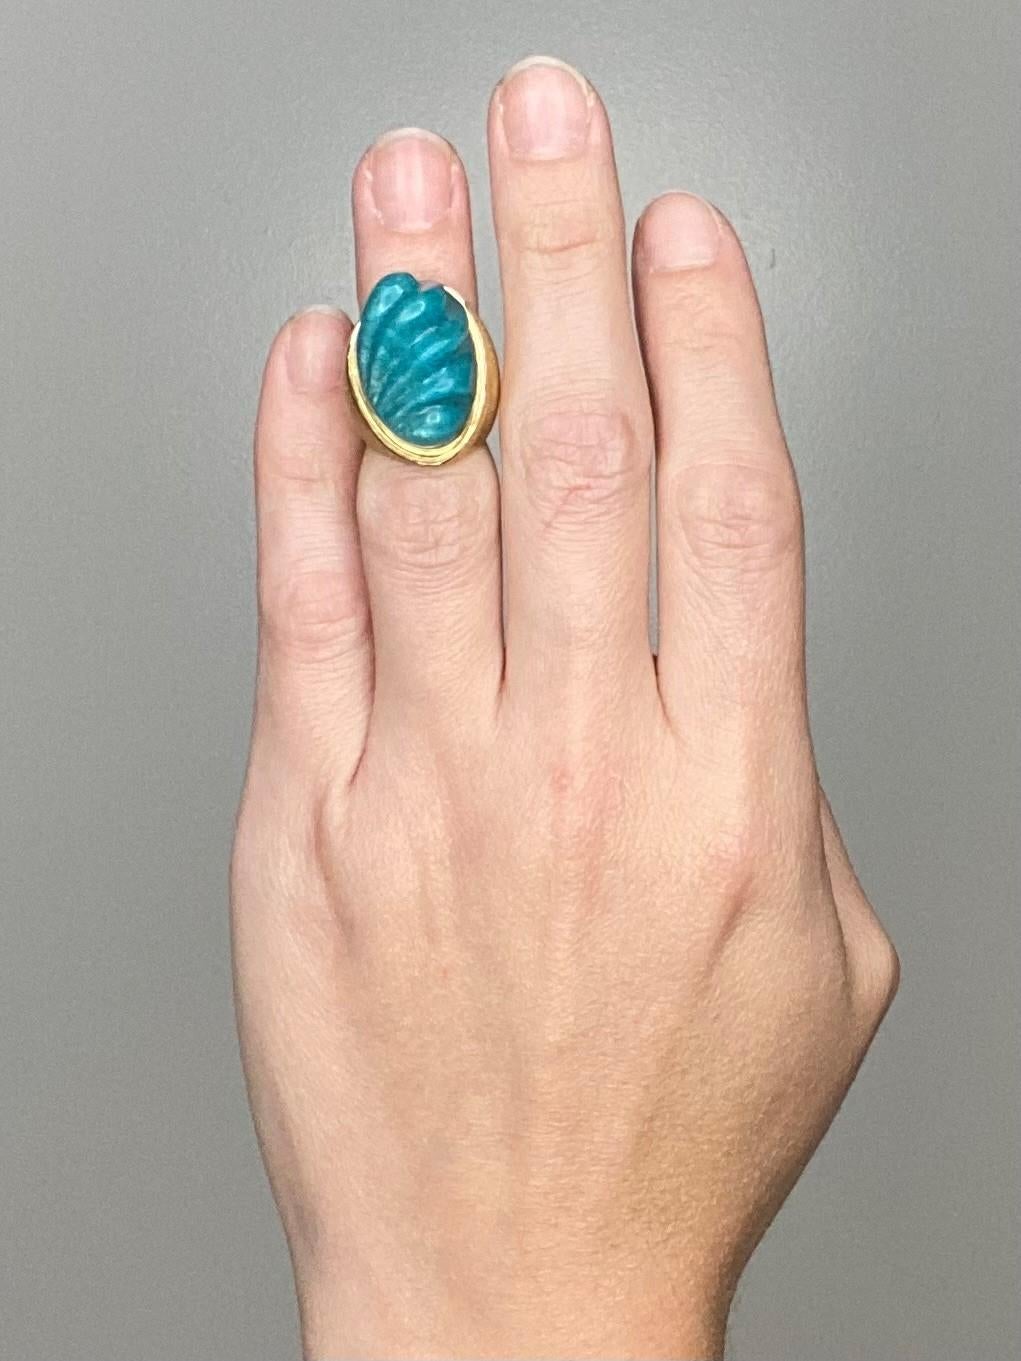 A mid-century sculptural ring designed by Haroldo Burle Marx.

This is one of the very early examples ring of the forma livre collection. Designed in brazil during the mid-century period, circa 1960's  It was crafted in 18 karats yellow gold and the